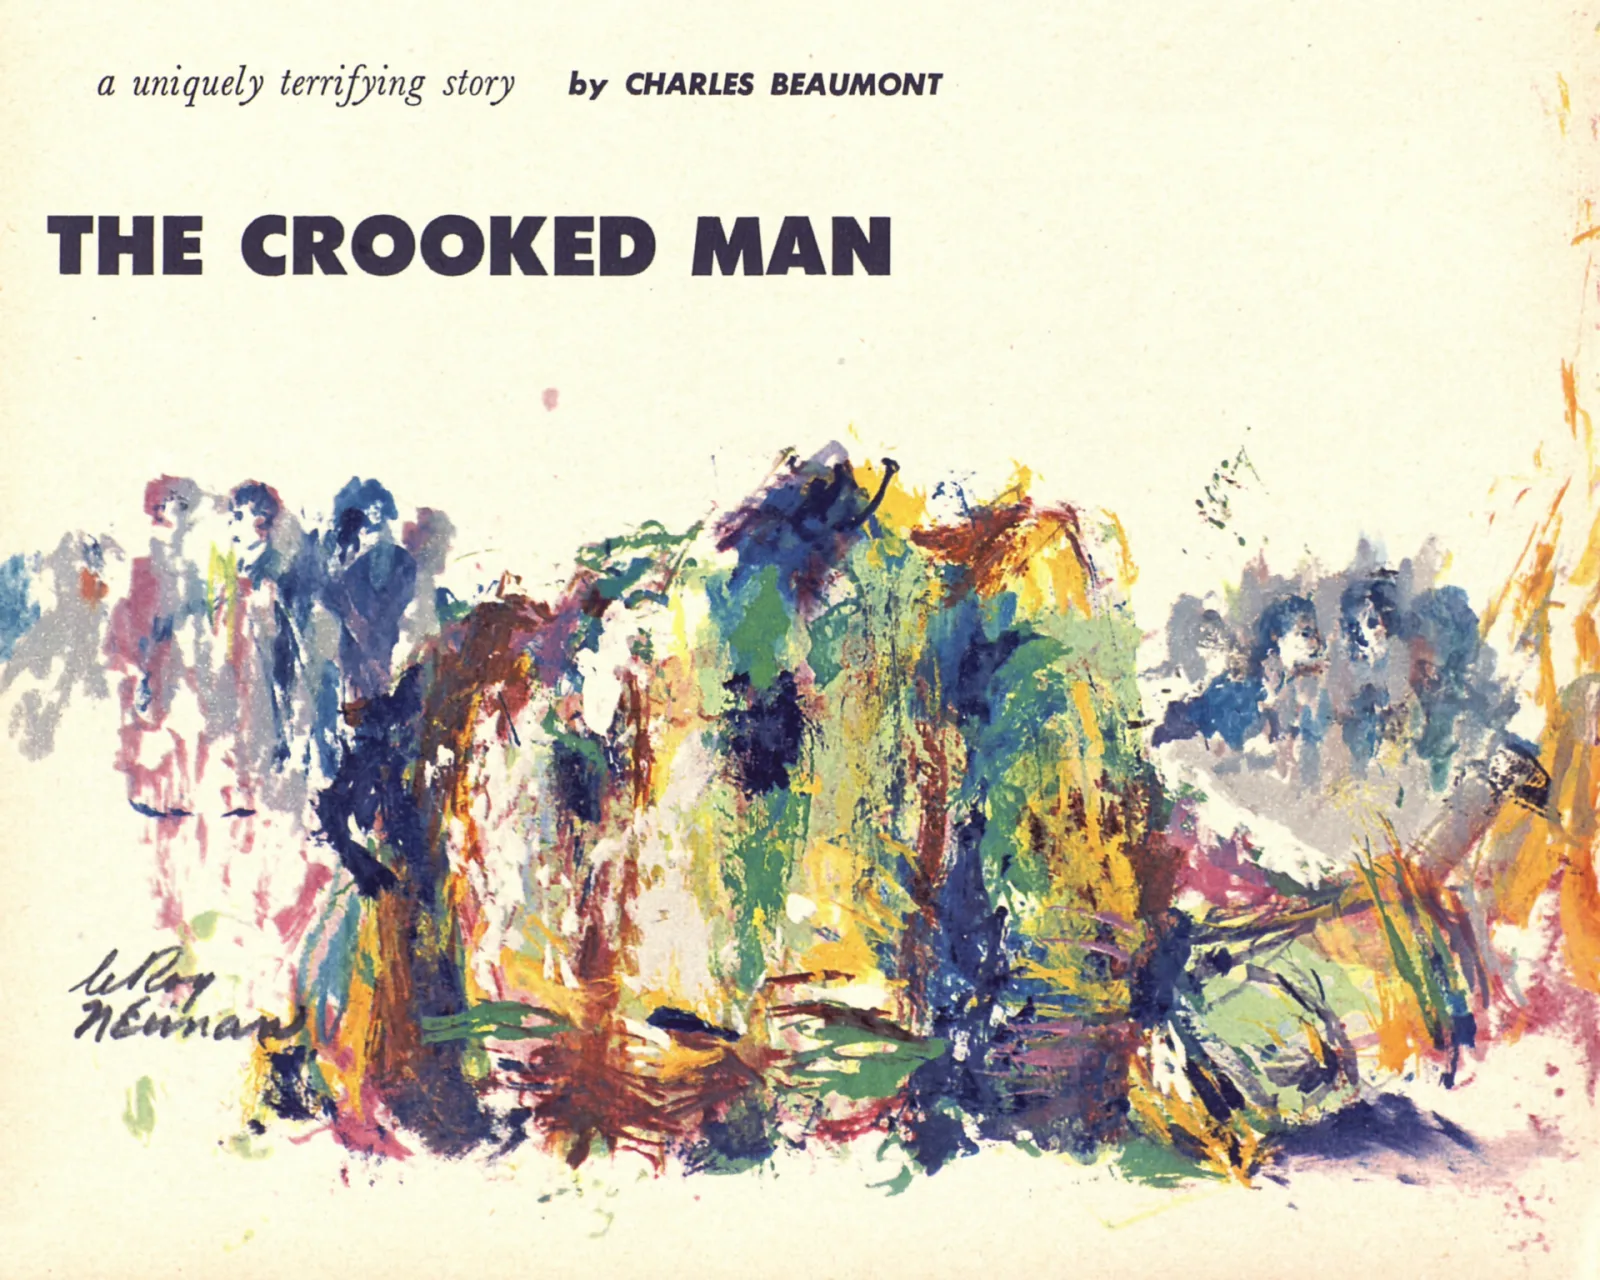 1955 - More than a decade before the Stonewall riots, Playboy publishes a short fiction piece, “The Crooked Man,” by Charles Beaumont, about a reverse society in which heterosexuality is criminalized. Following criticism by readers, the magazine responds, “If it was wrong to persecute heterosexuals in a homosexual society, then the reverse was wrong, too.”
